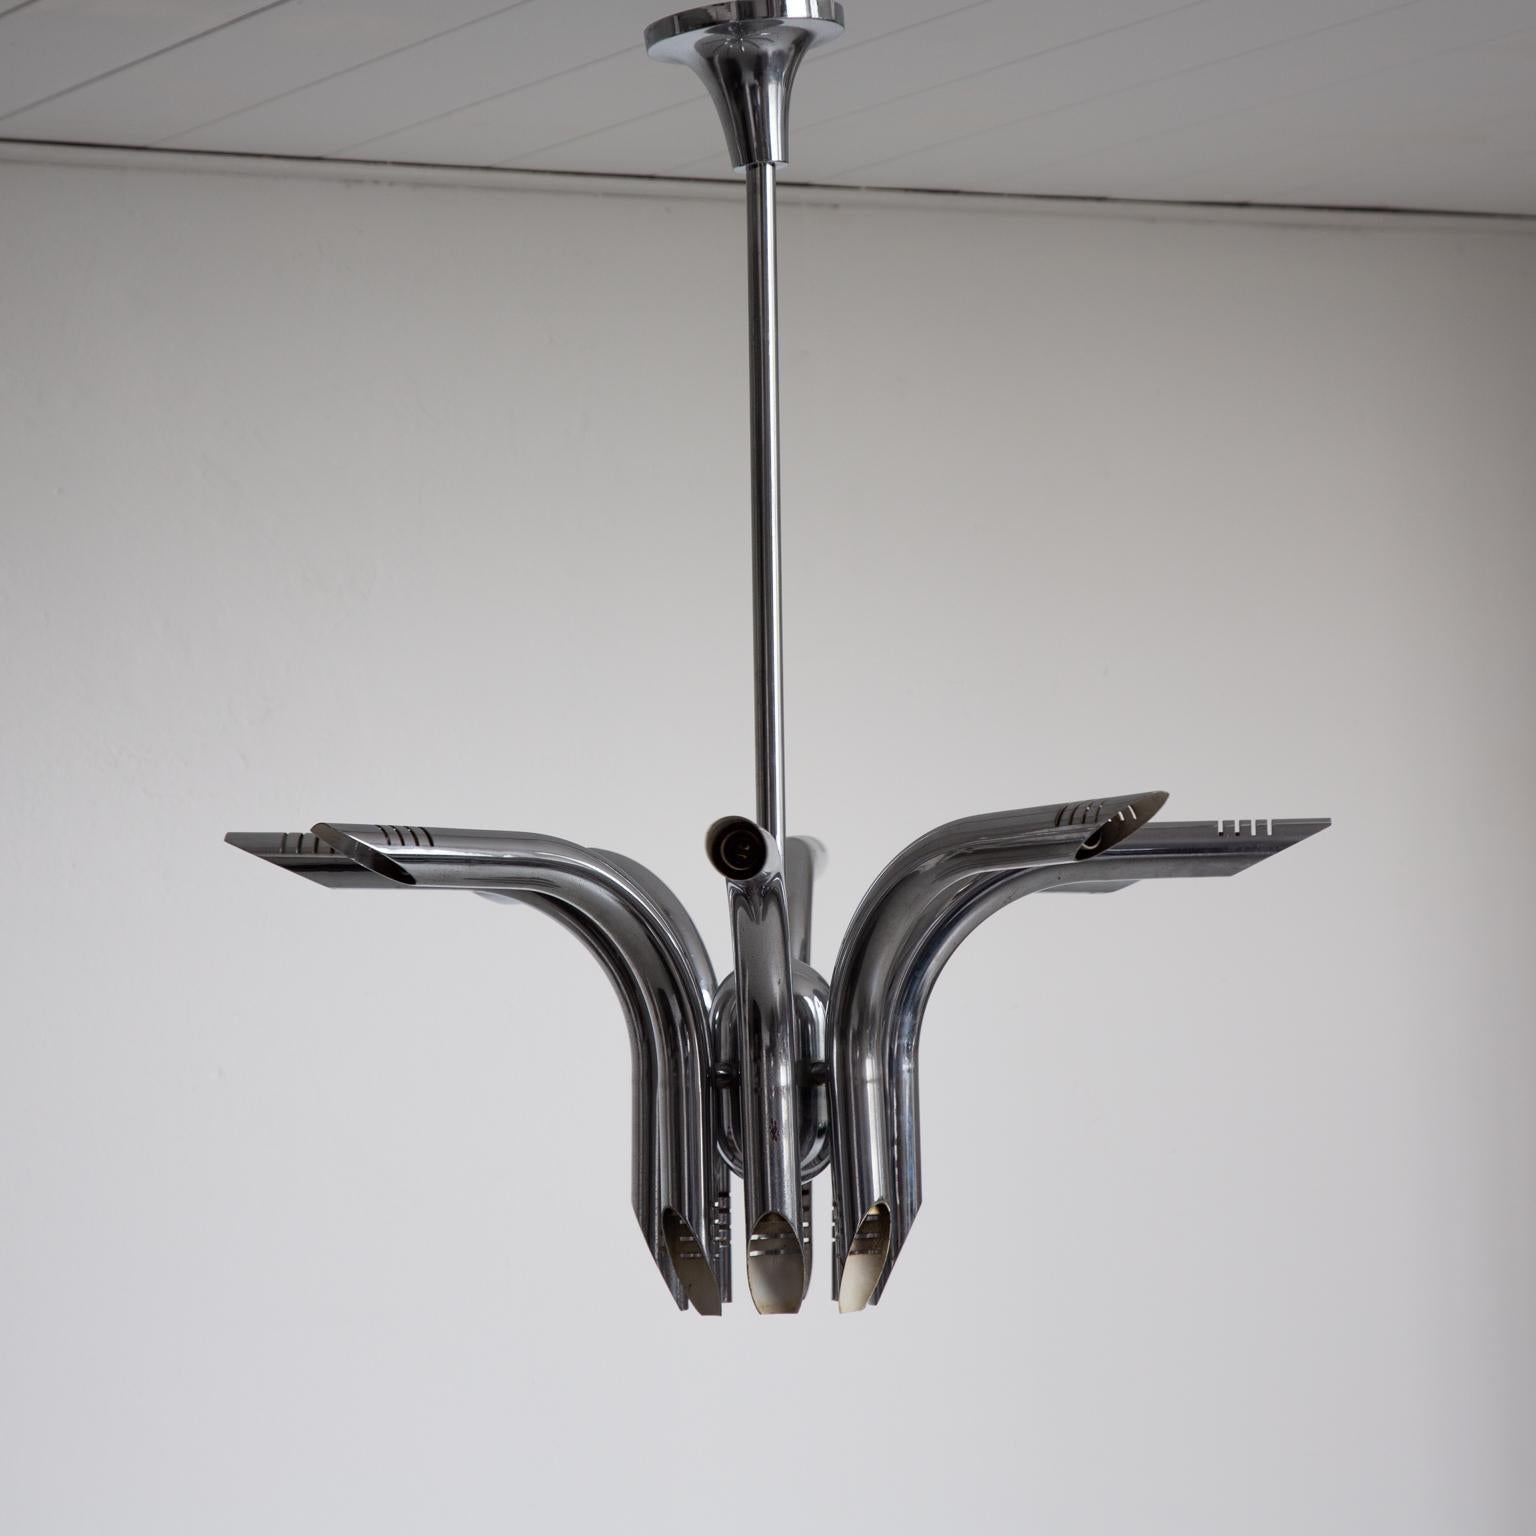 Modern Vintage Chromed Steel Pipes Pendant Chandelier, Contemporary Industrial Style For Sale